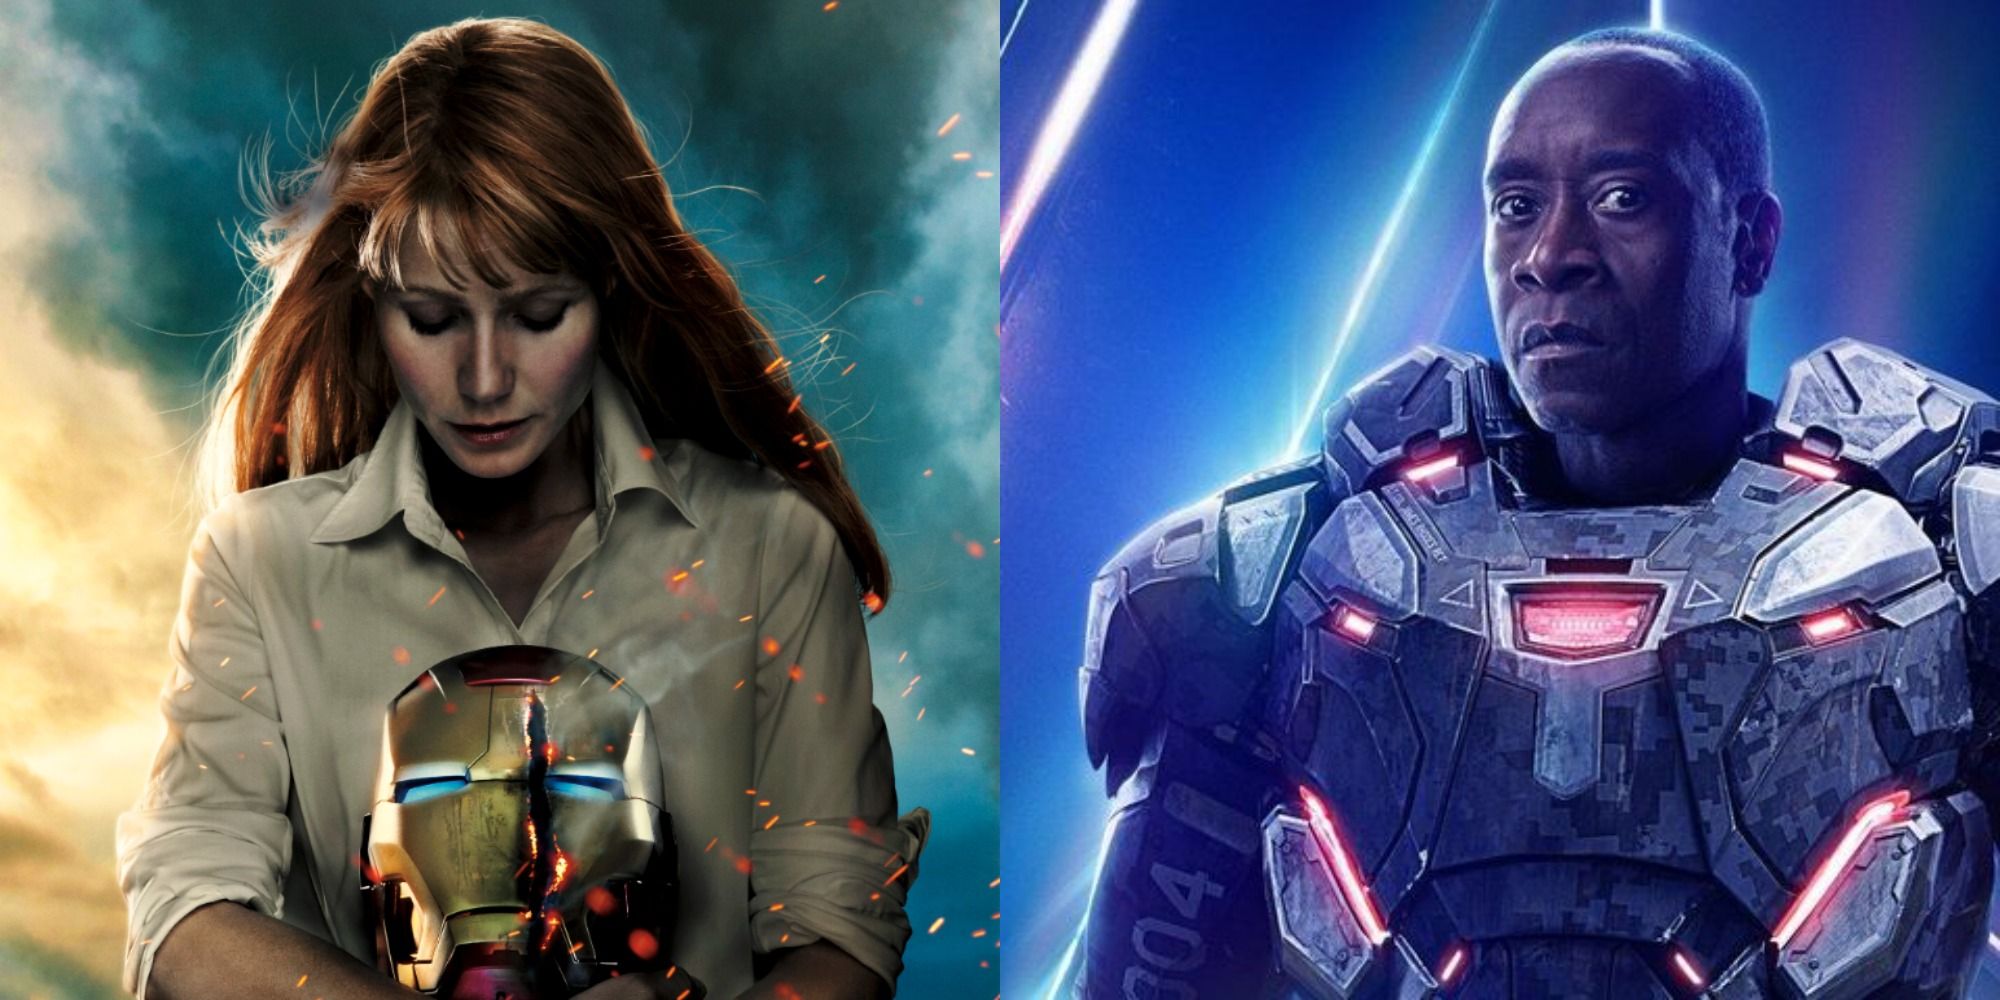 Side-by-side photo of Pepper Potts and James Rhodes from Iron Man